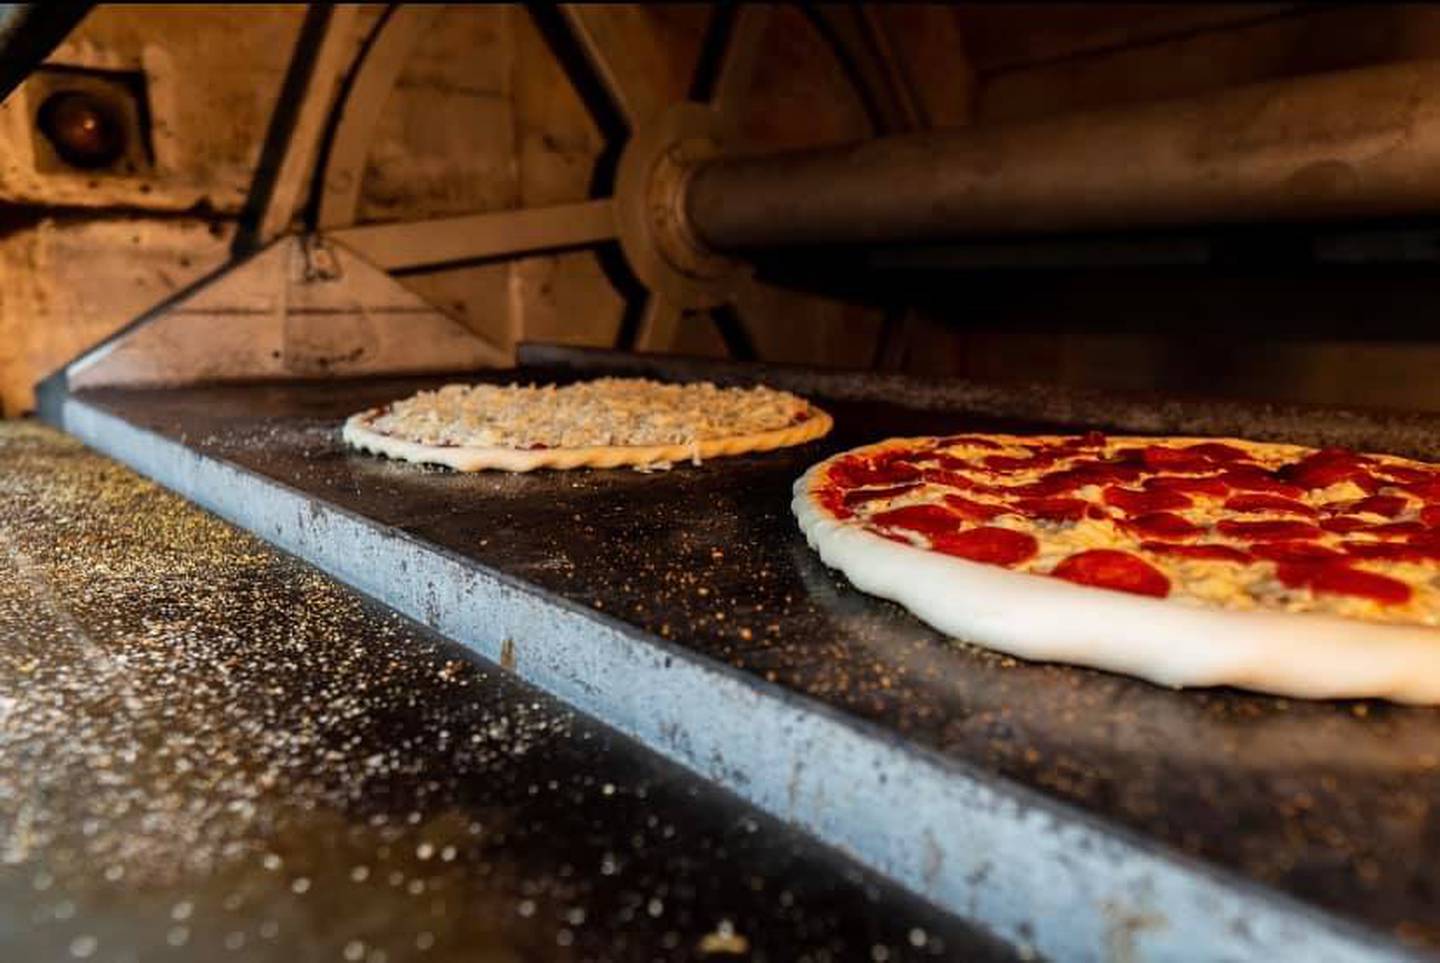 Rosati's Pizza was voted one of the top pizza places in McHenry County. (Photo from Rosati's Pizza Facebook page)